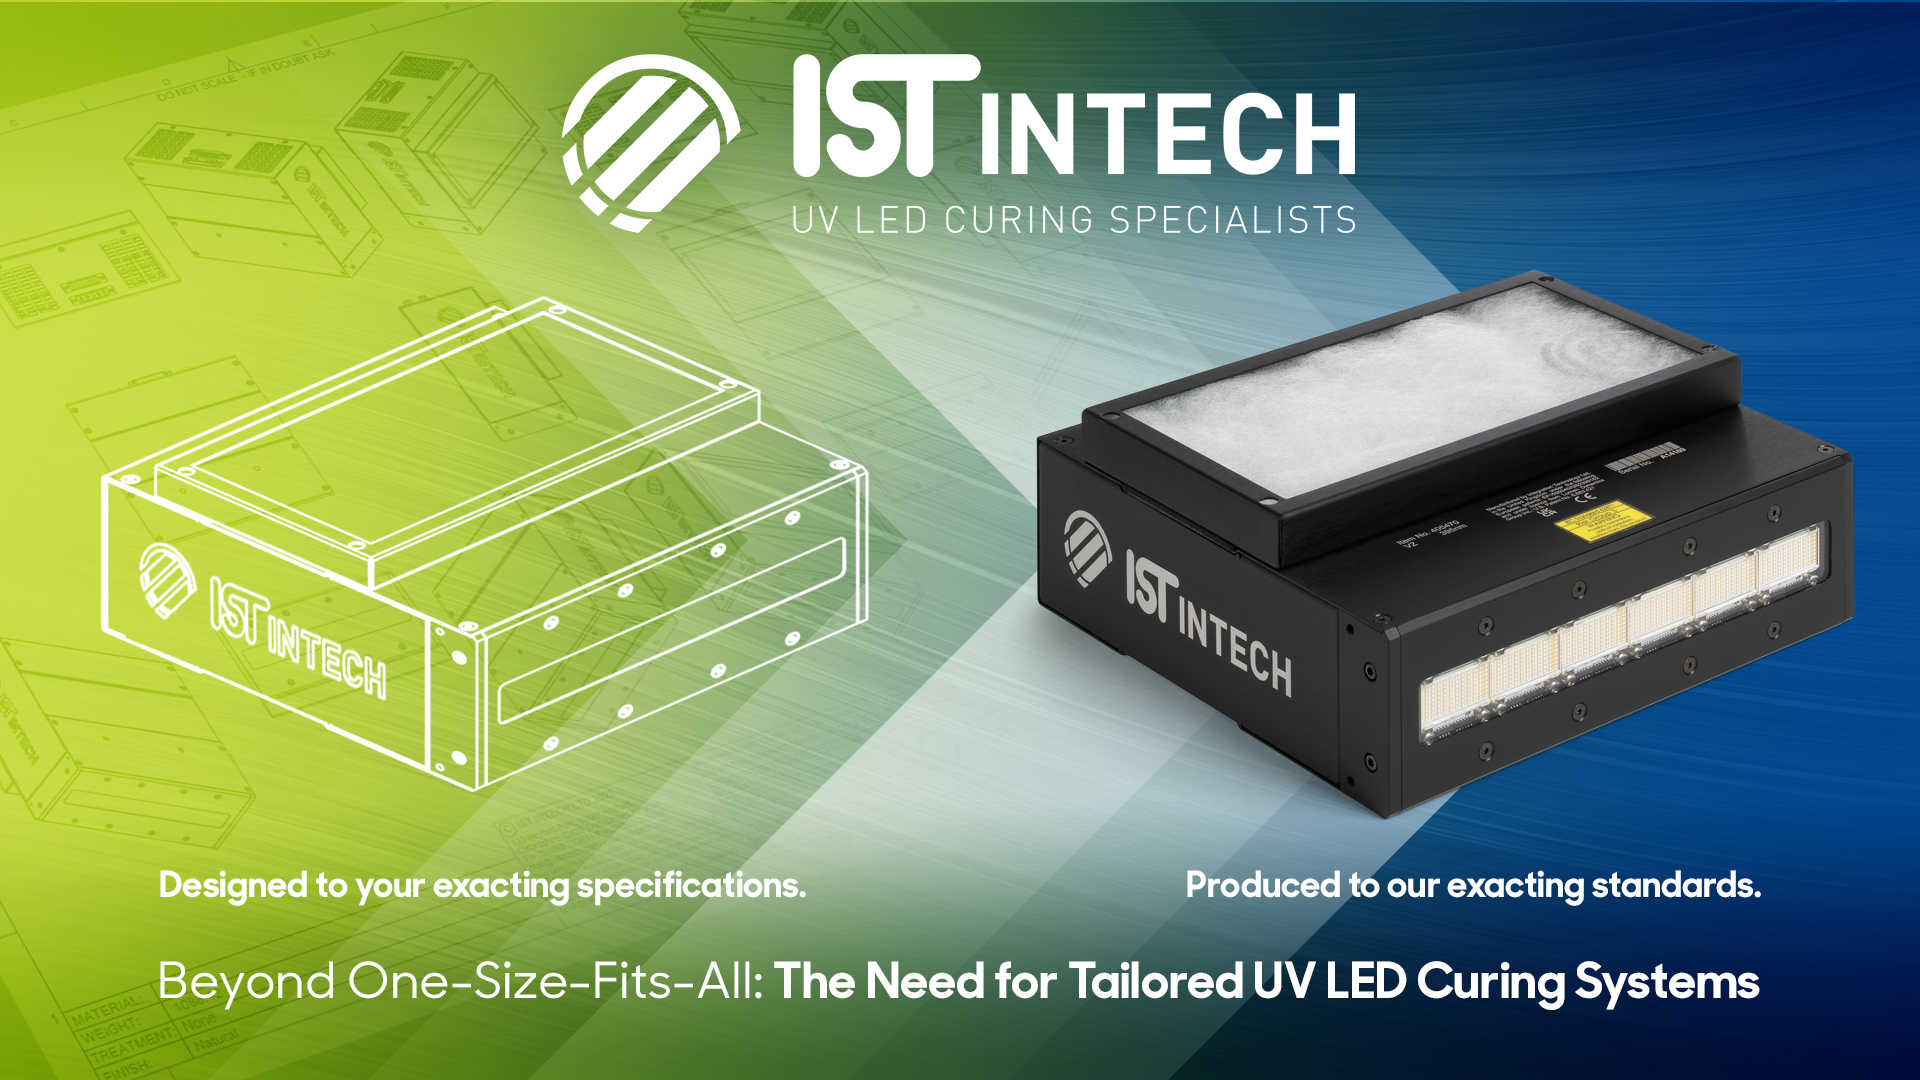 The Need for a Tailored UV LED Curing System